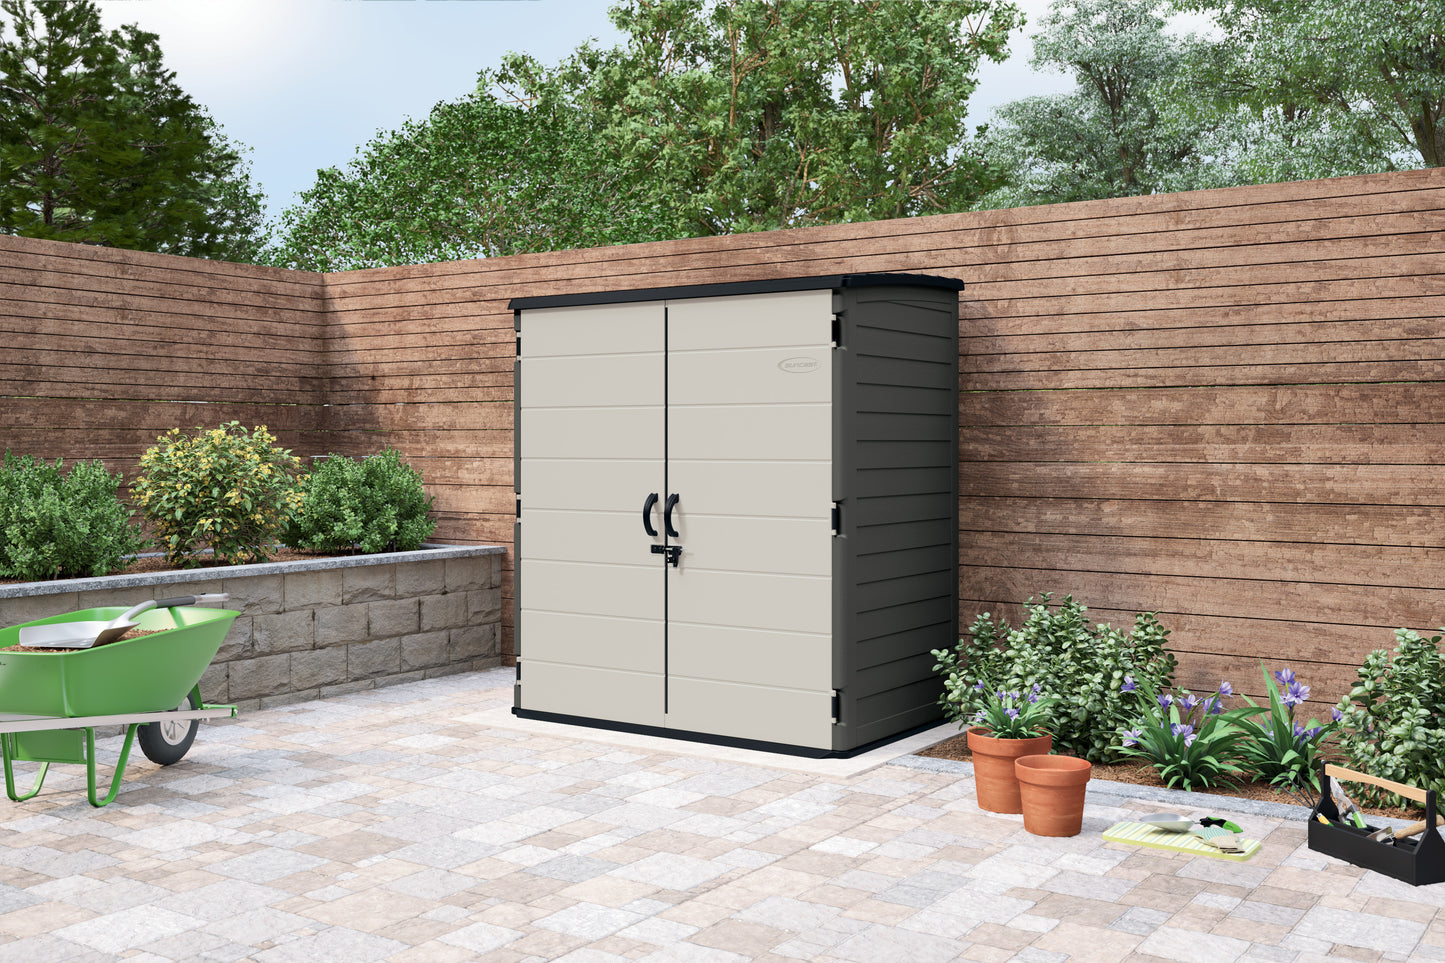 Suncast Extra Large Vertical Storage Shed - Peppercorn 106 Cu Ft. BMS6280